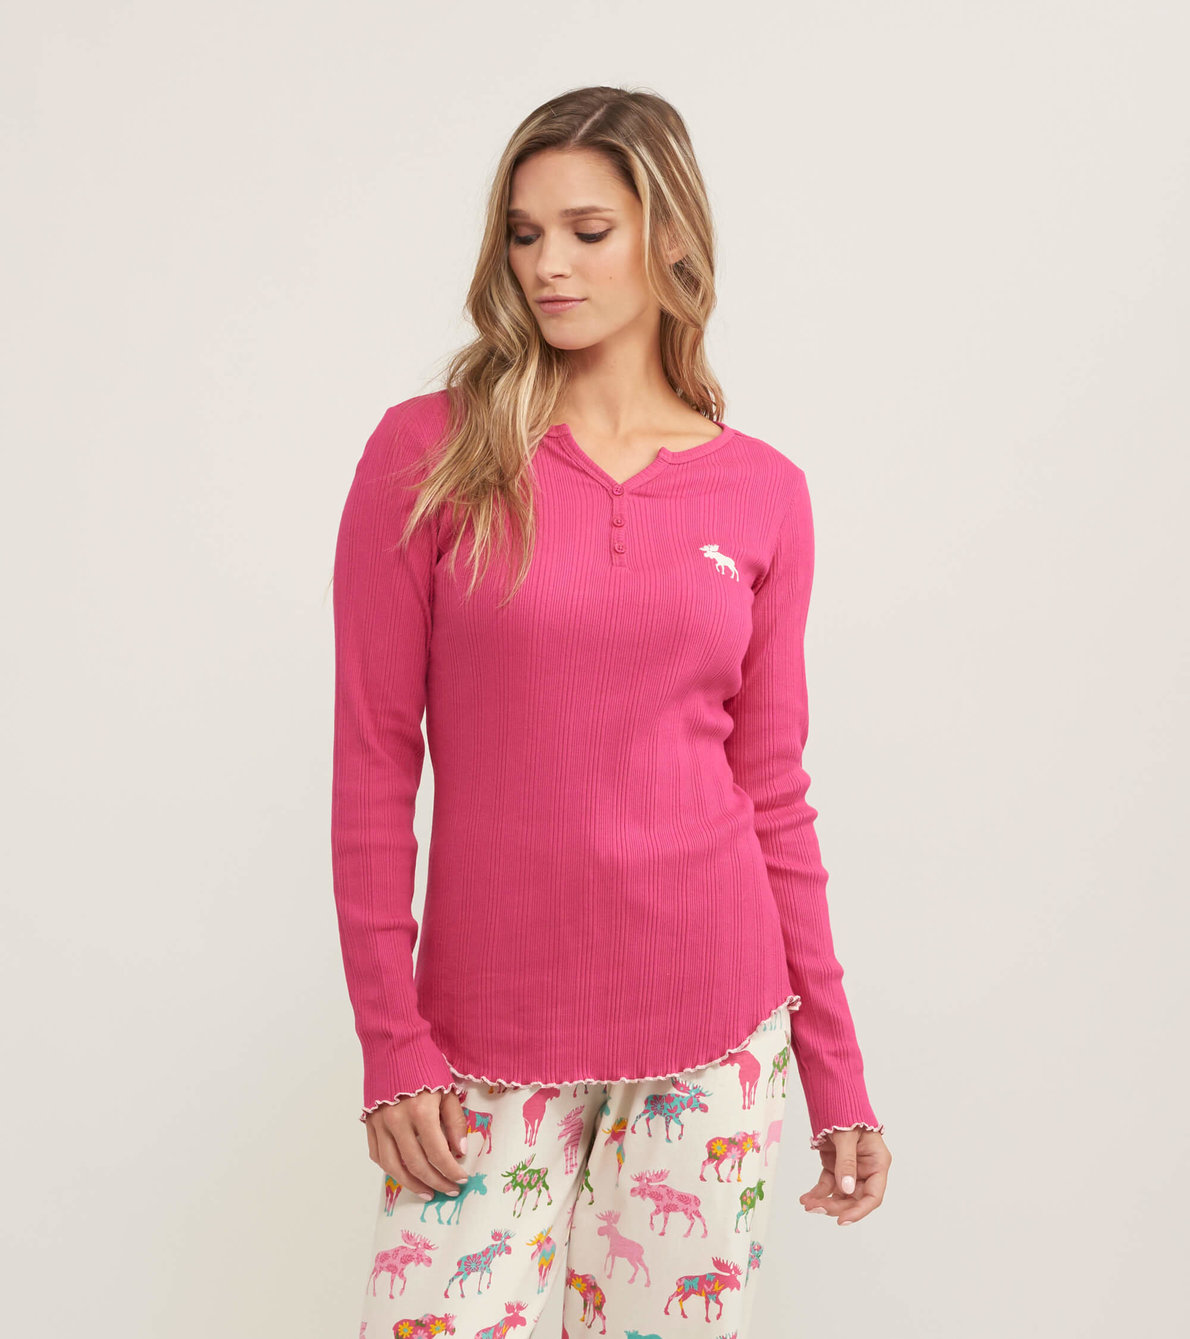 View larger image of Moose Women's Rib Long Sleeve Henley